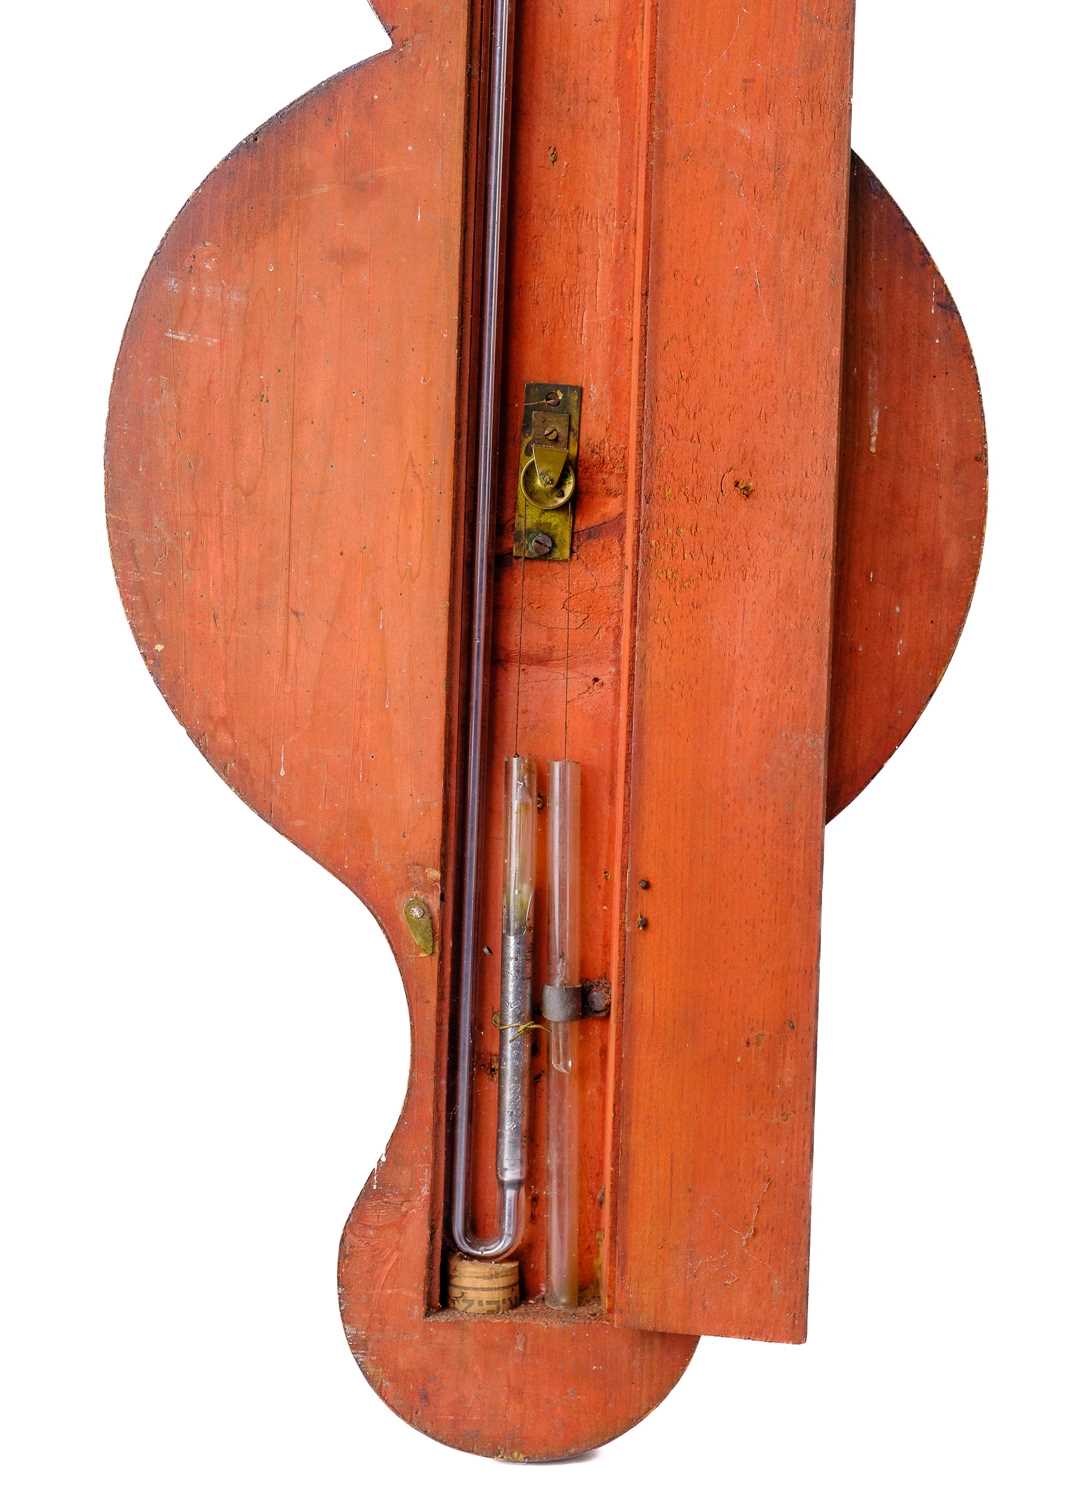 A 19th century mahogany barometer/thermometer by Cetti & Co. of London. - Image 7 of 7